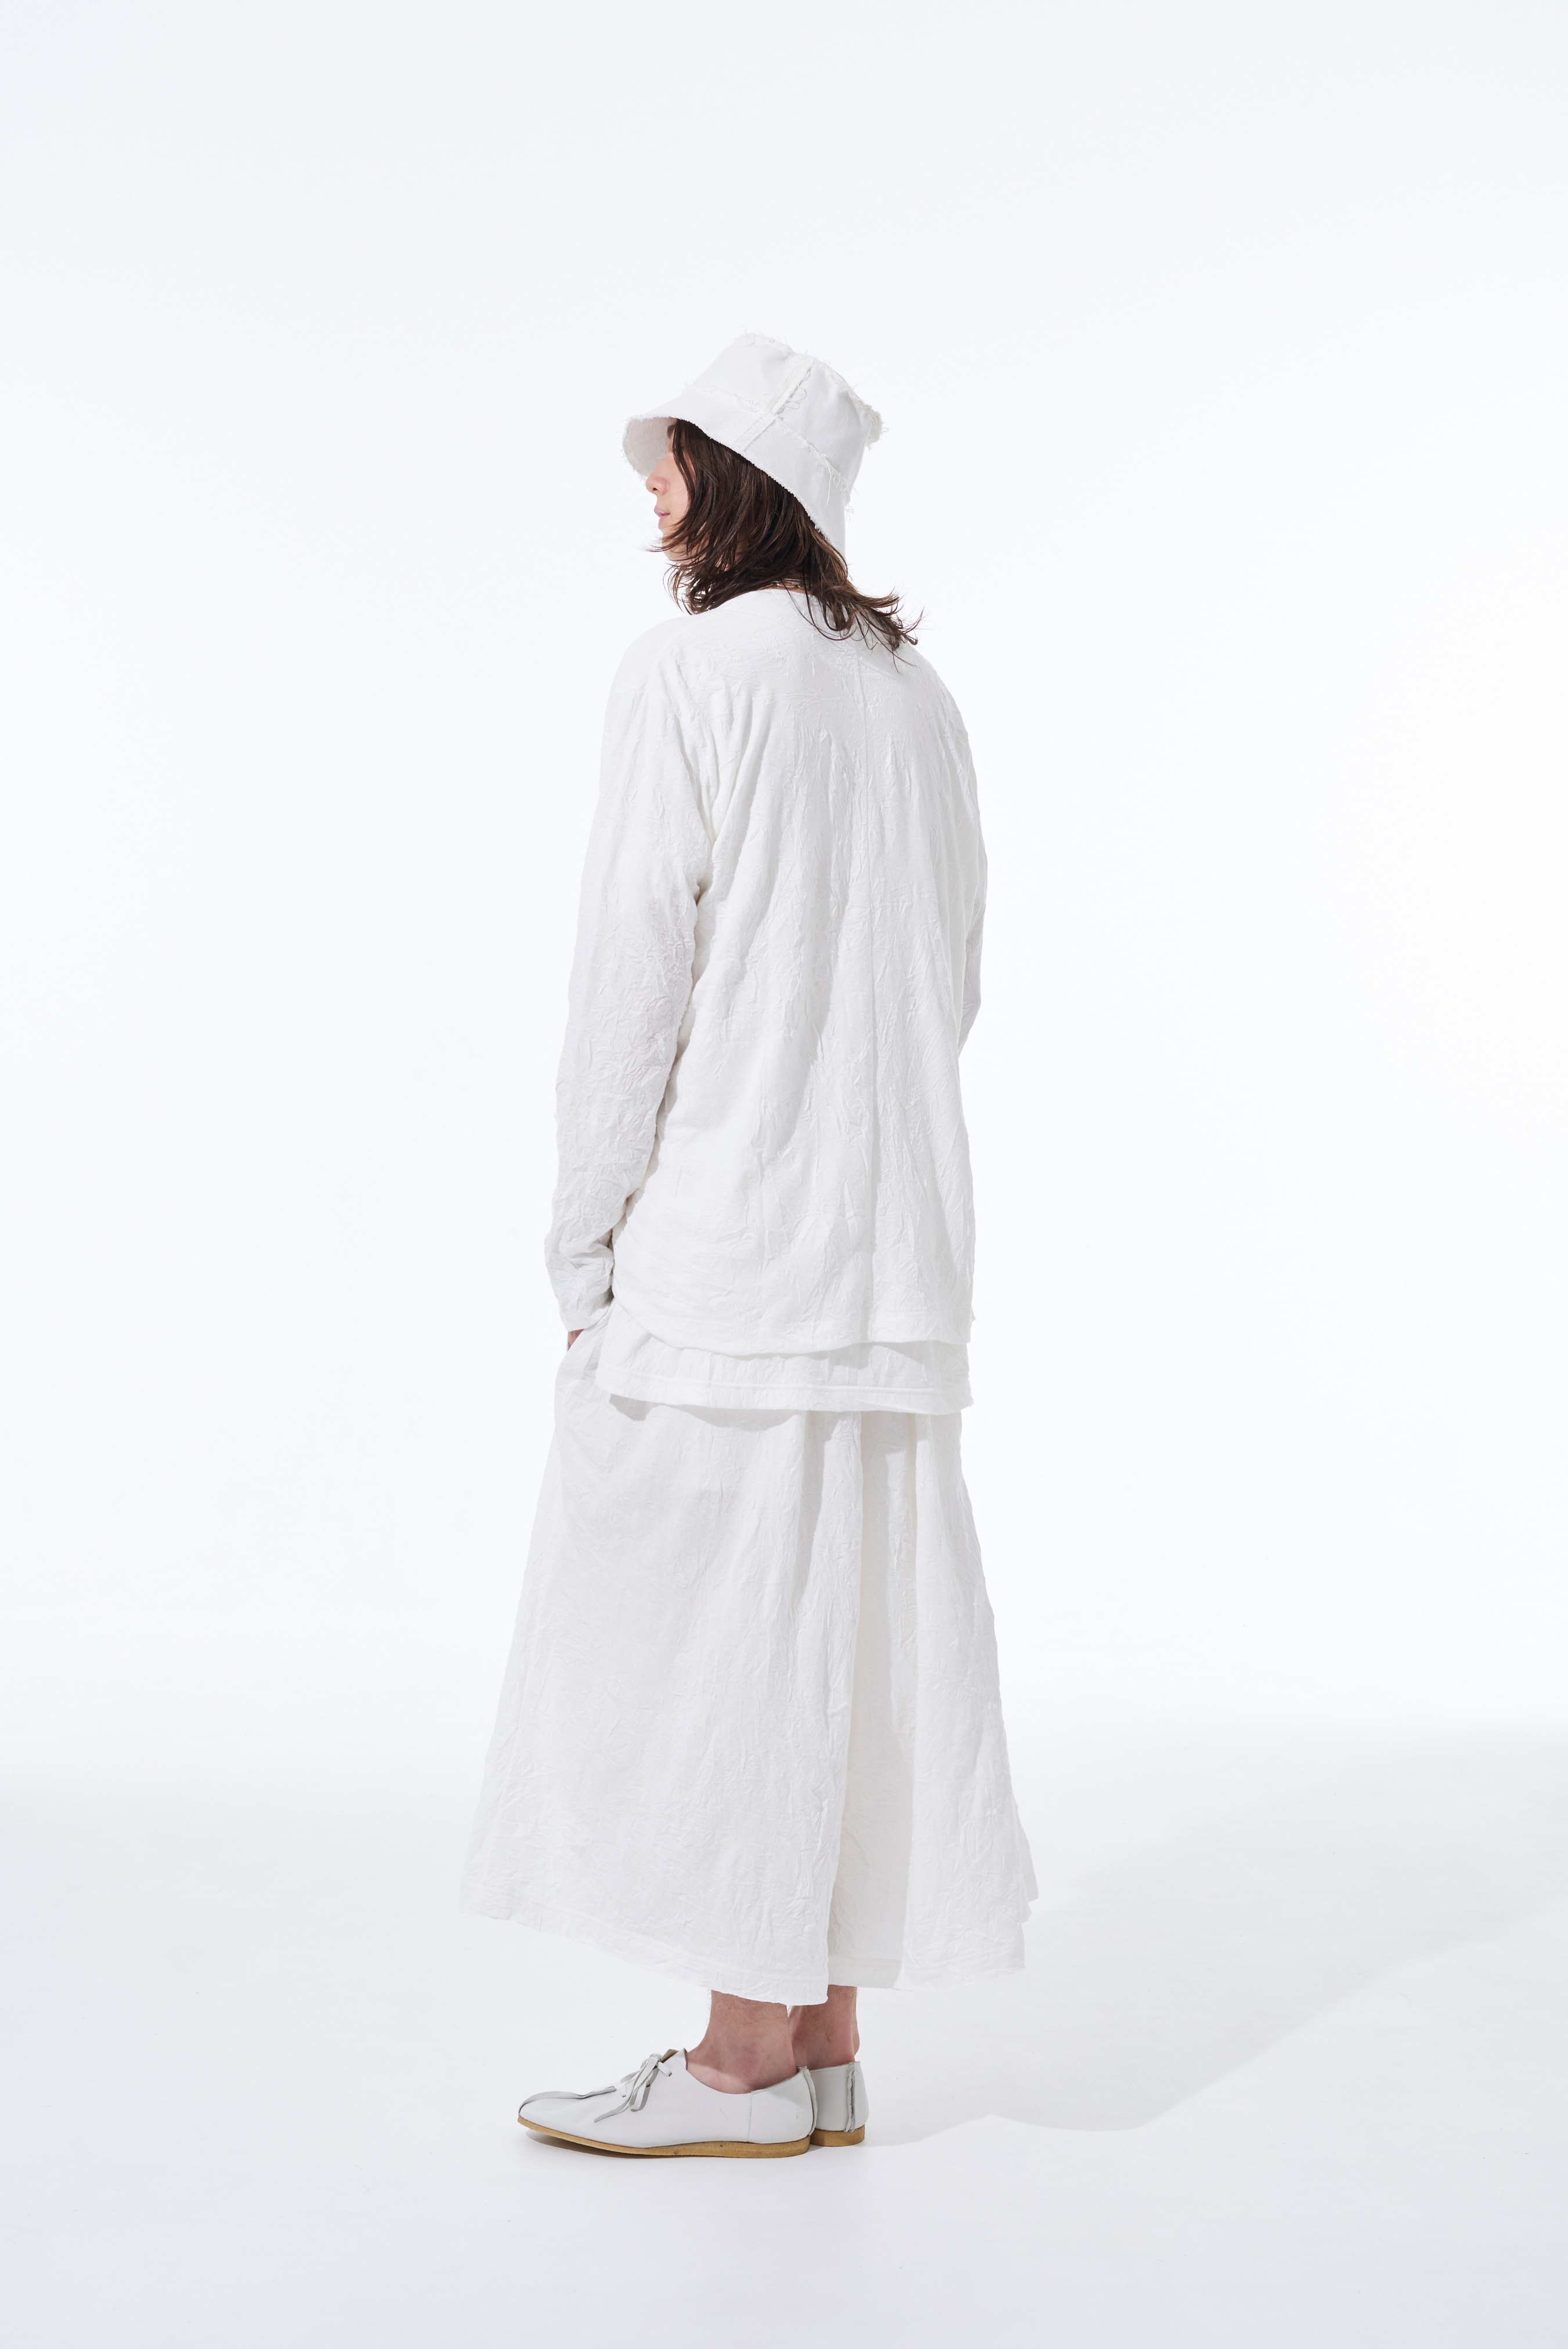 CATCH-WASHER FINISH COTTON JERSEY CARDIGAN(M White): S'YTE｜THE 